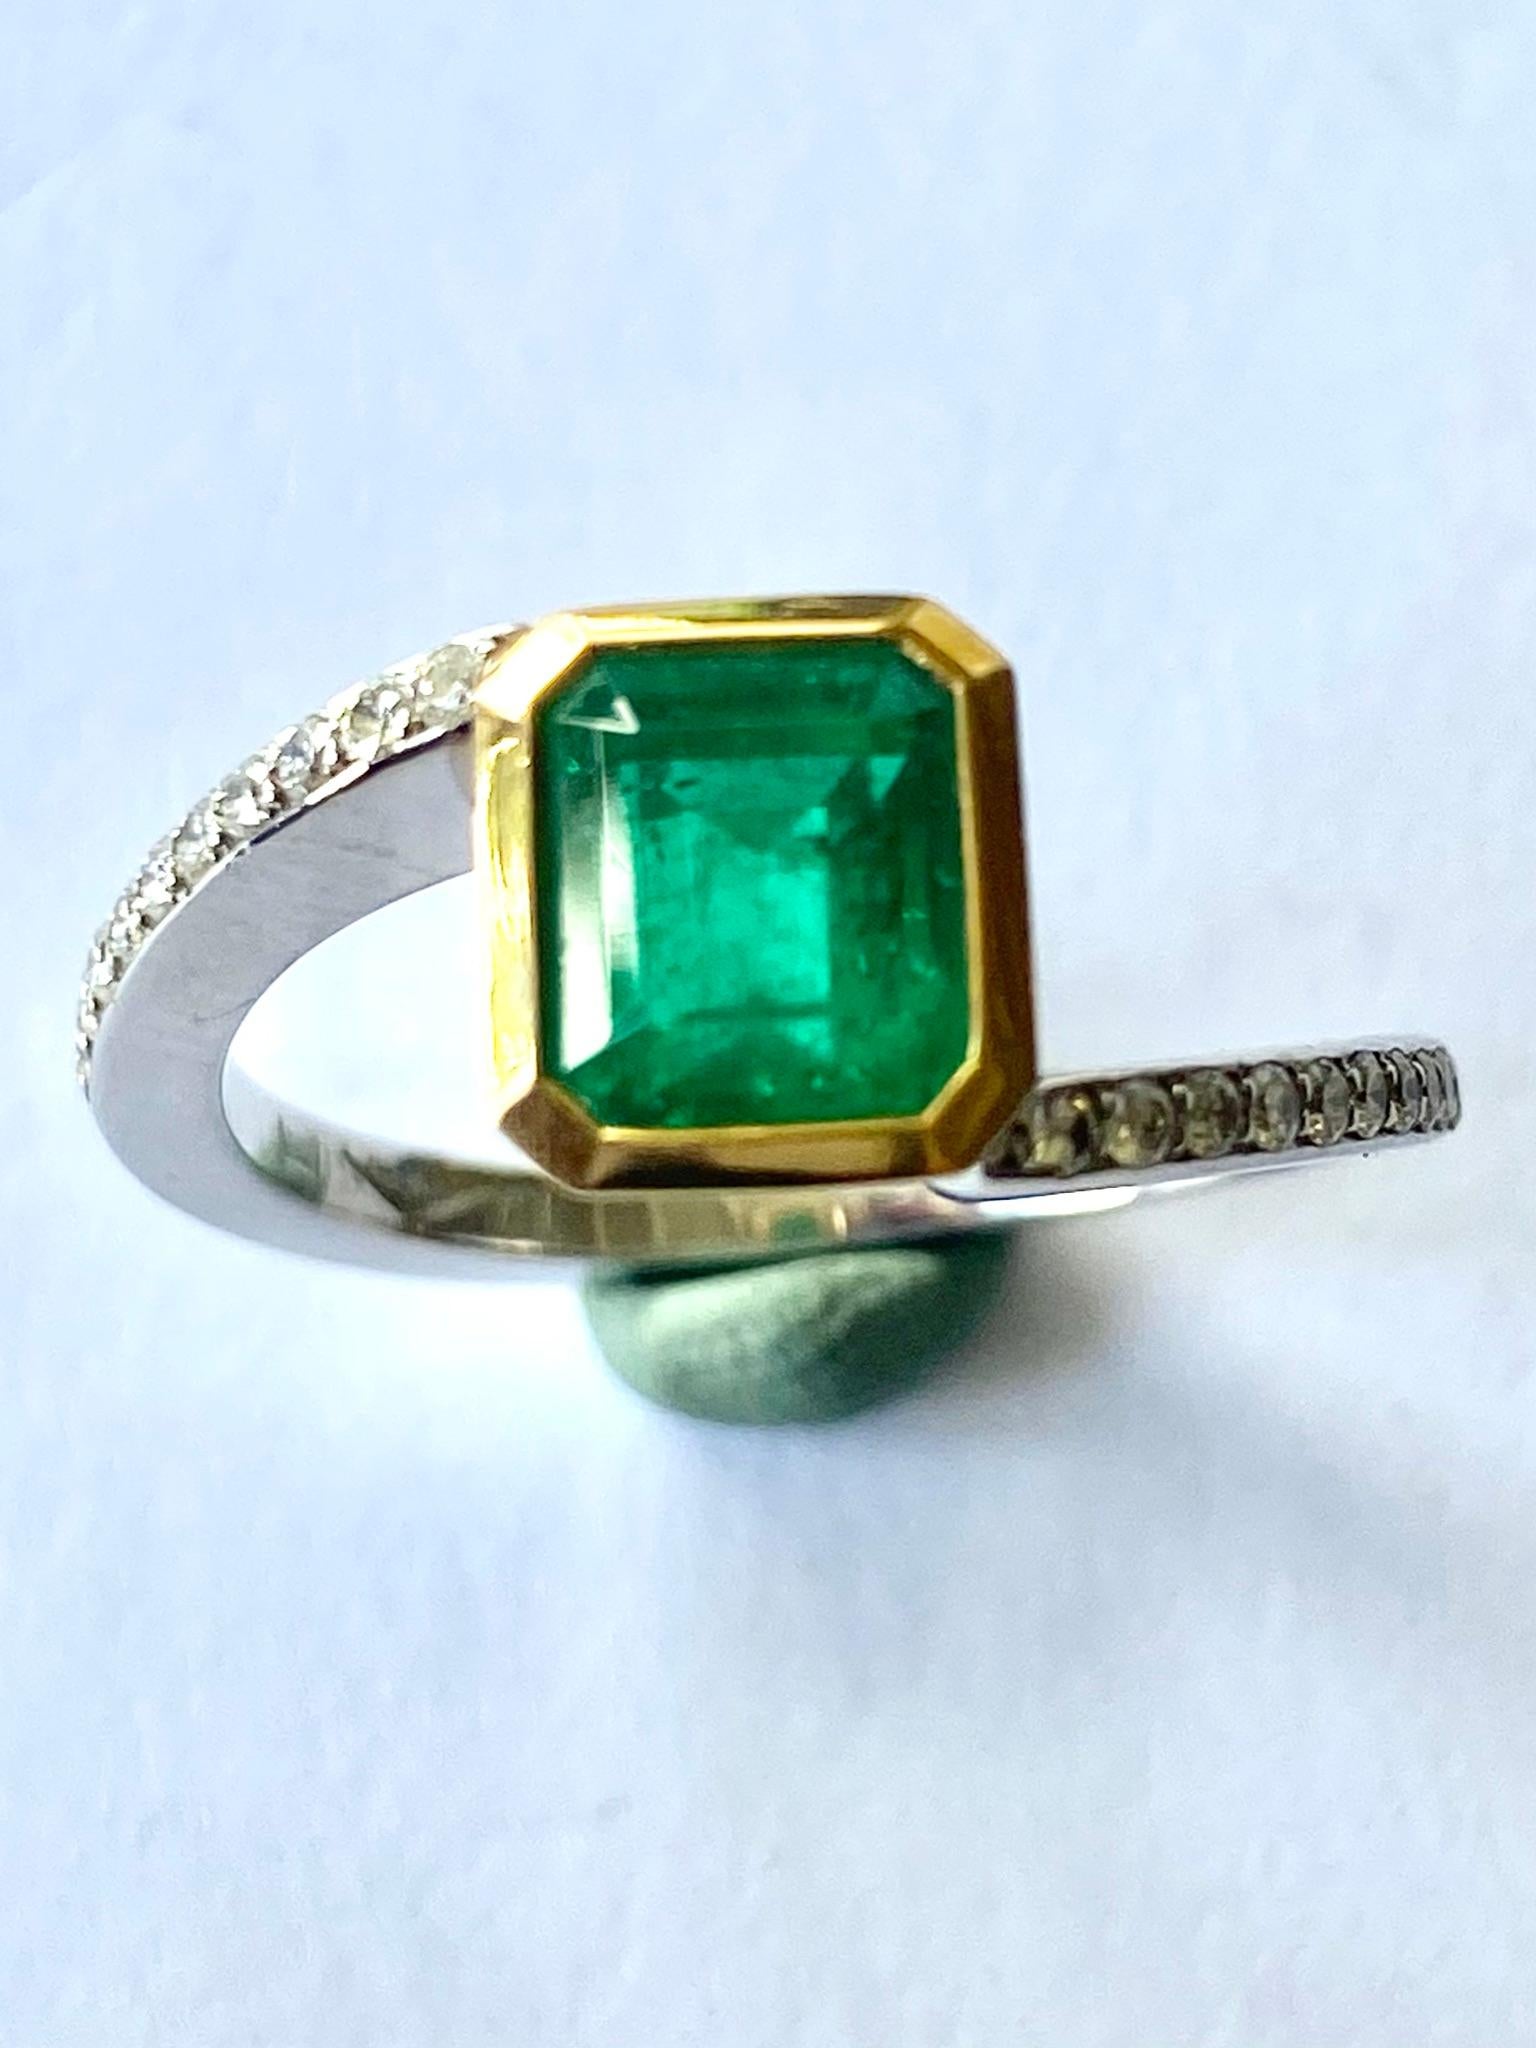 Emerald Cut Colombia Emerald of 1.30 Ct and Diamonds Sert in a 18K, Gold Hand Made Ring For Sale